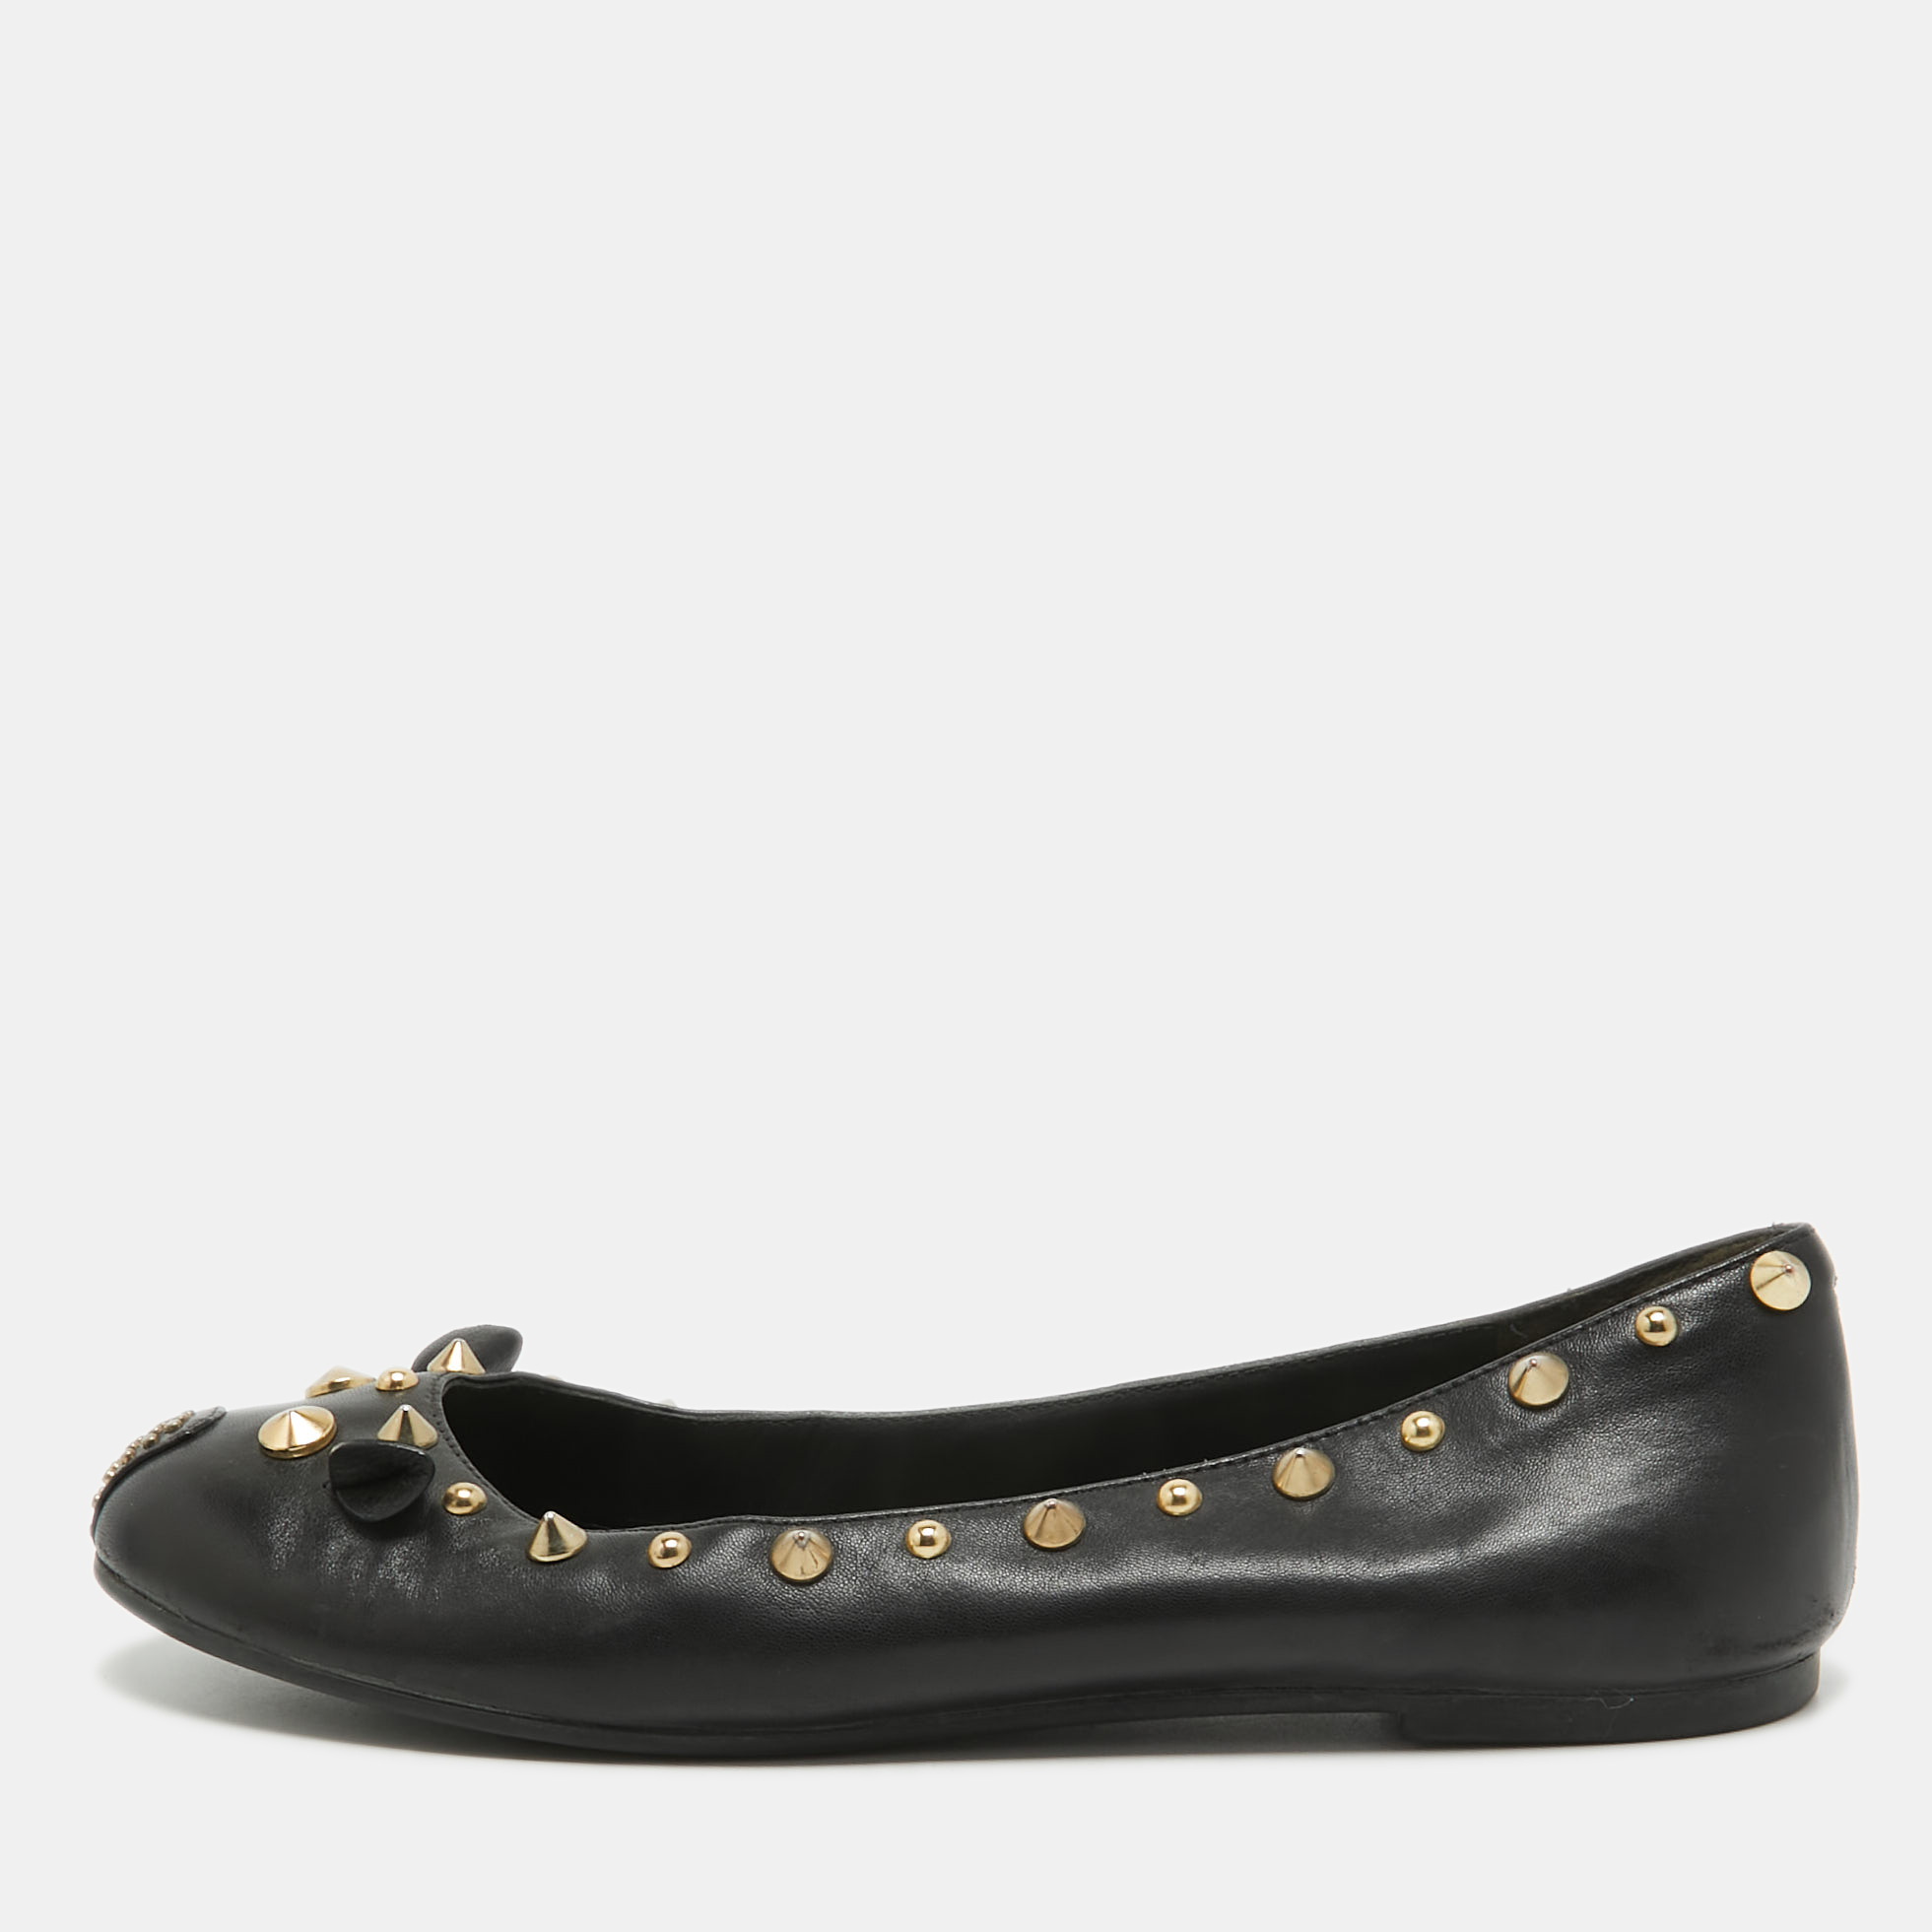 Marc by marc jacobs black leather studded mouse ballet flats size 36